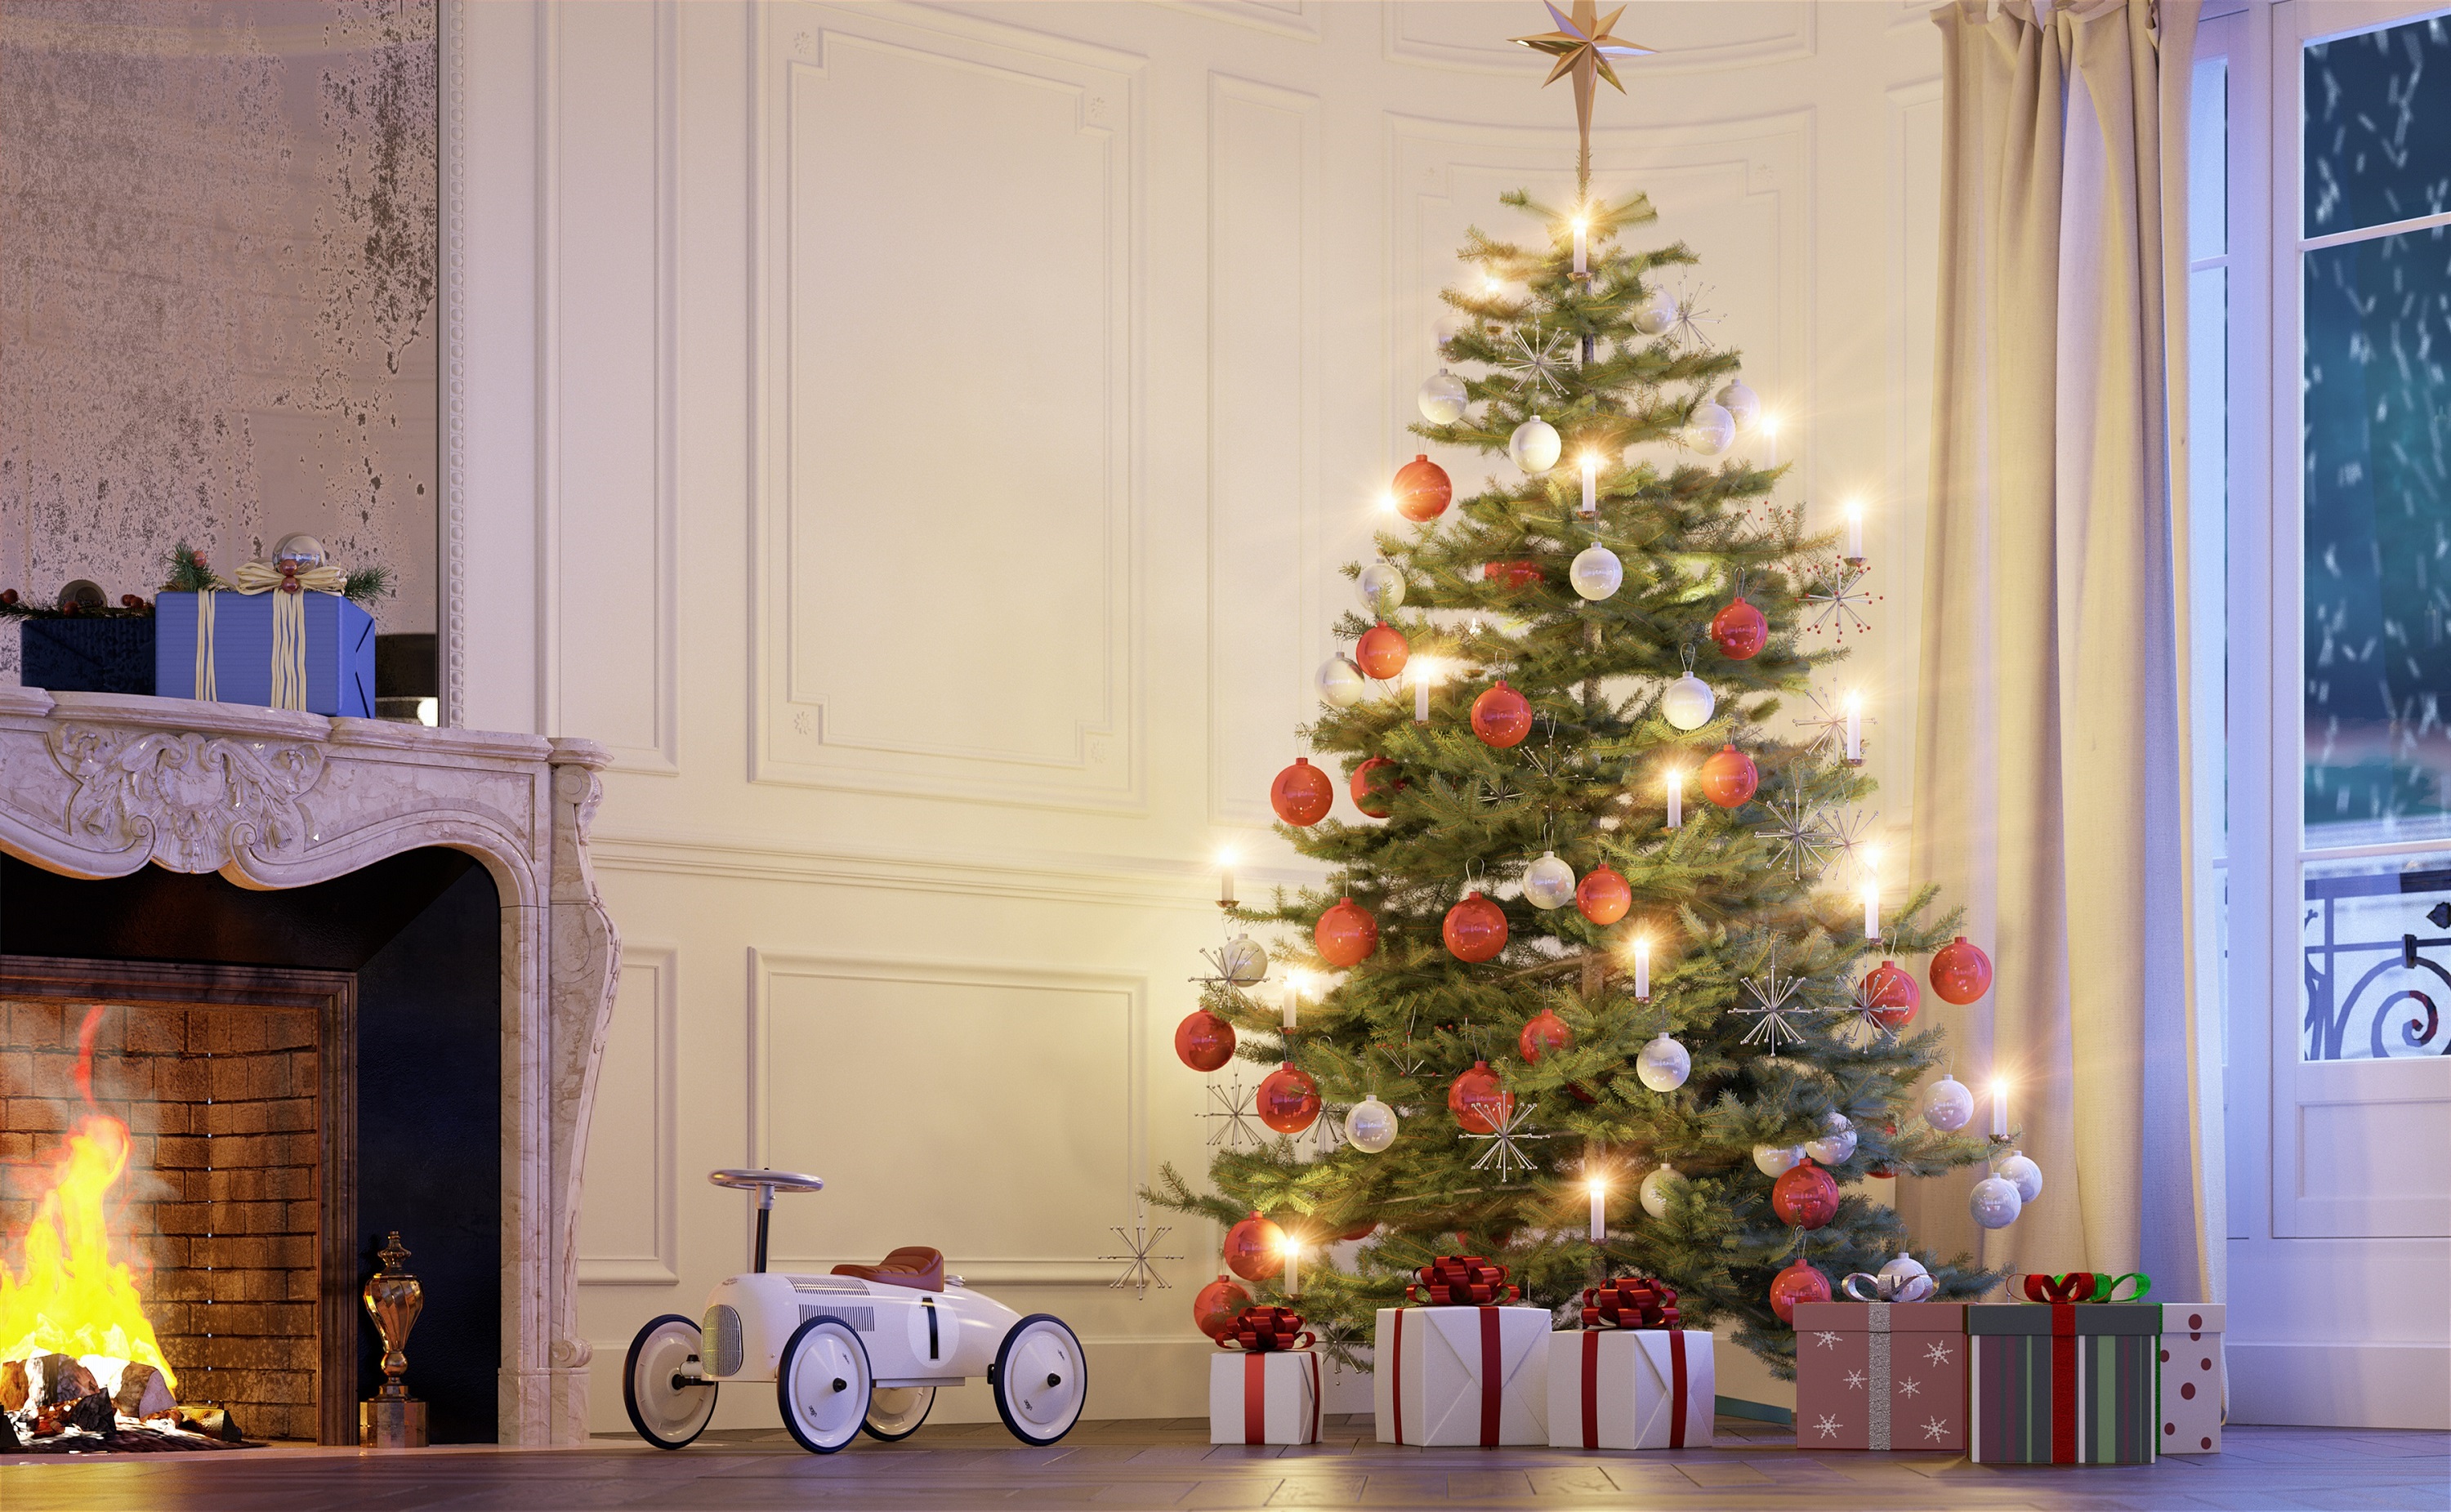 How To Keep A Christmas Tree Alive Throughout The Holidays | OrnamentShop.com